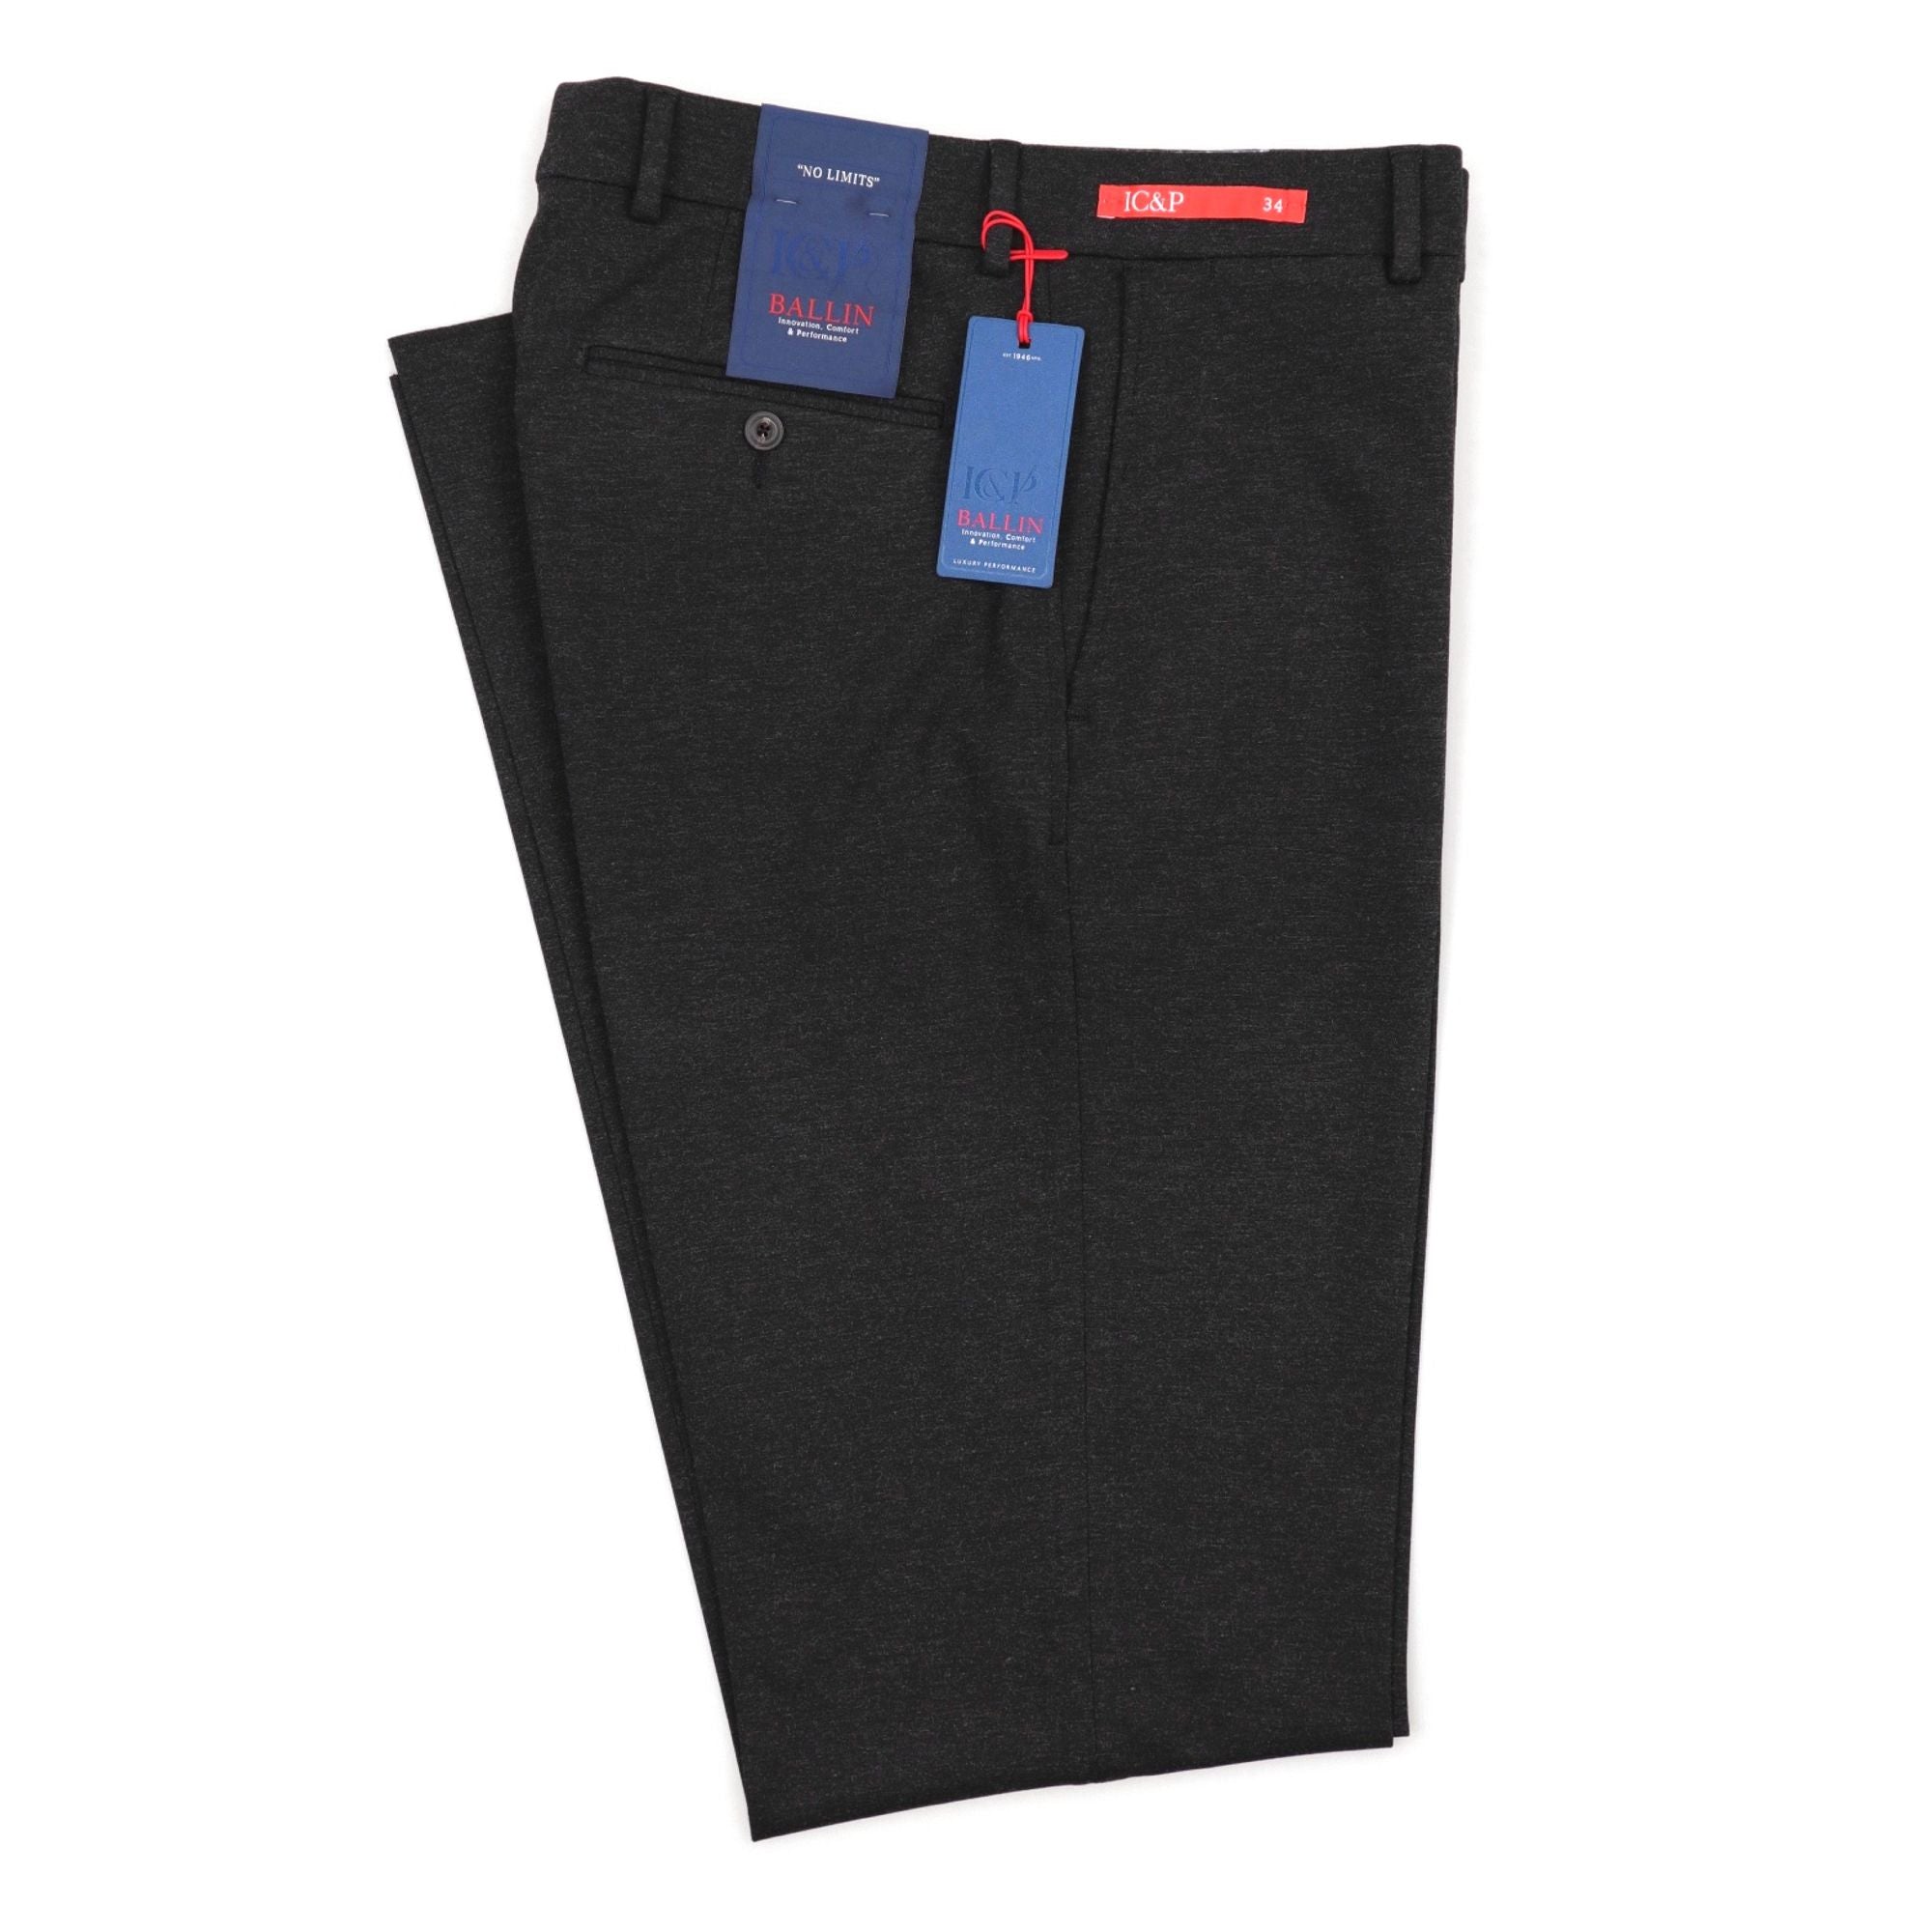 No Limits 360° Stretch High Performance Knit Trouser in Charcoal (Size 32) (Theo Slim Fit) by Ballin